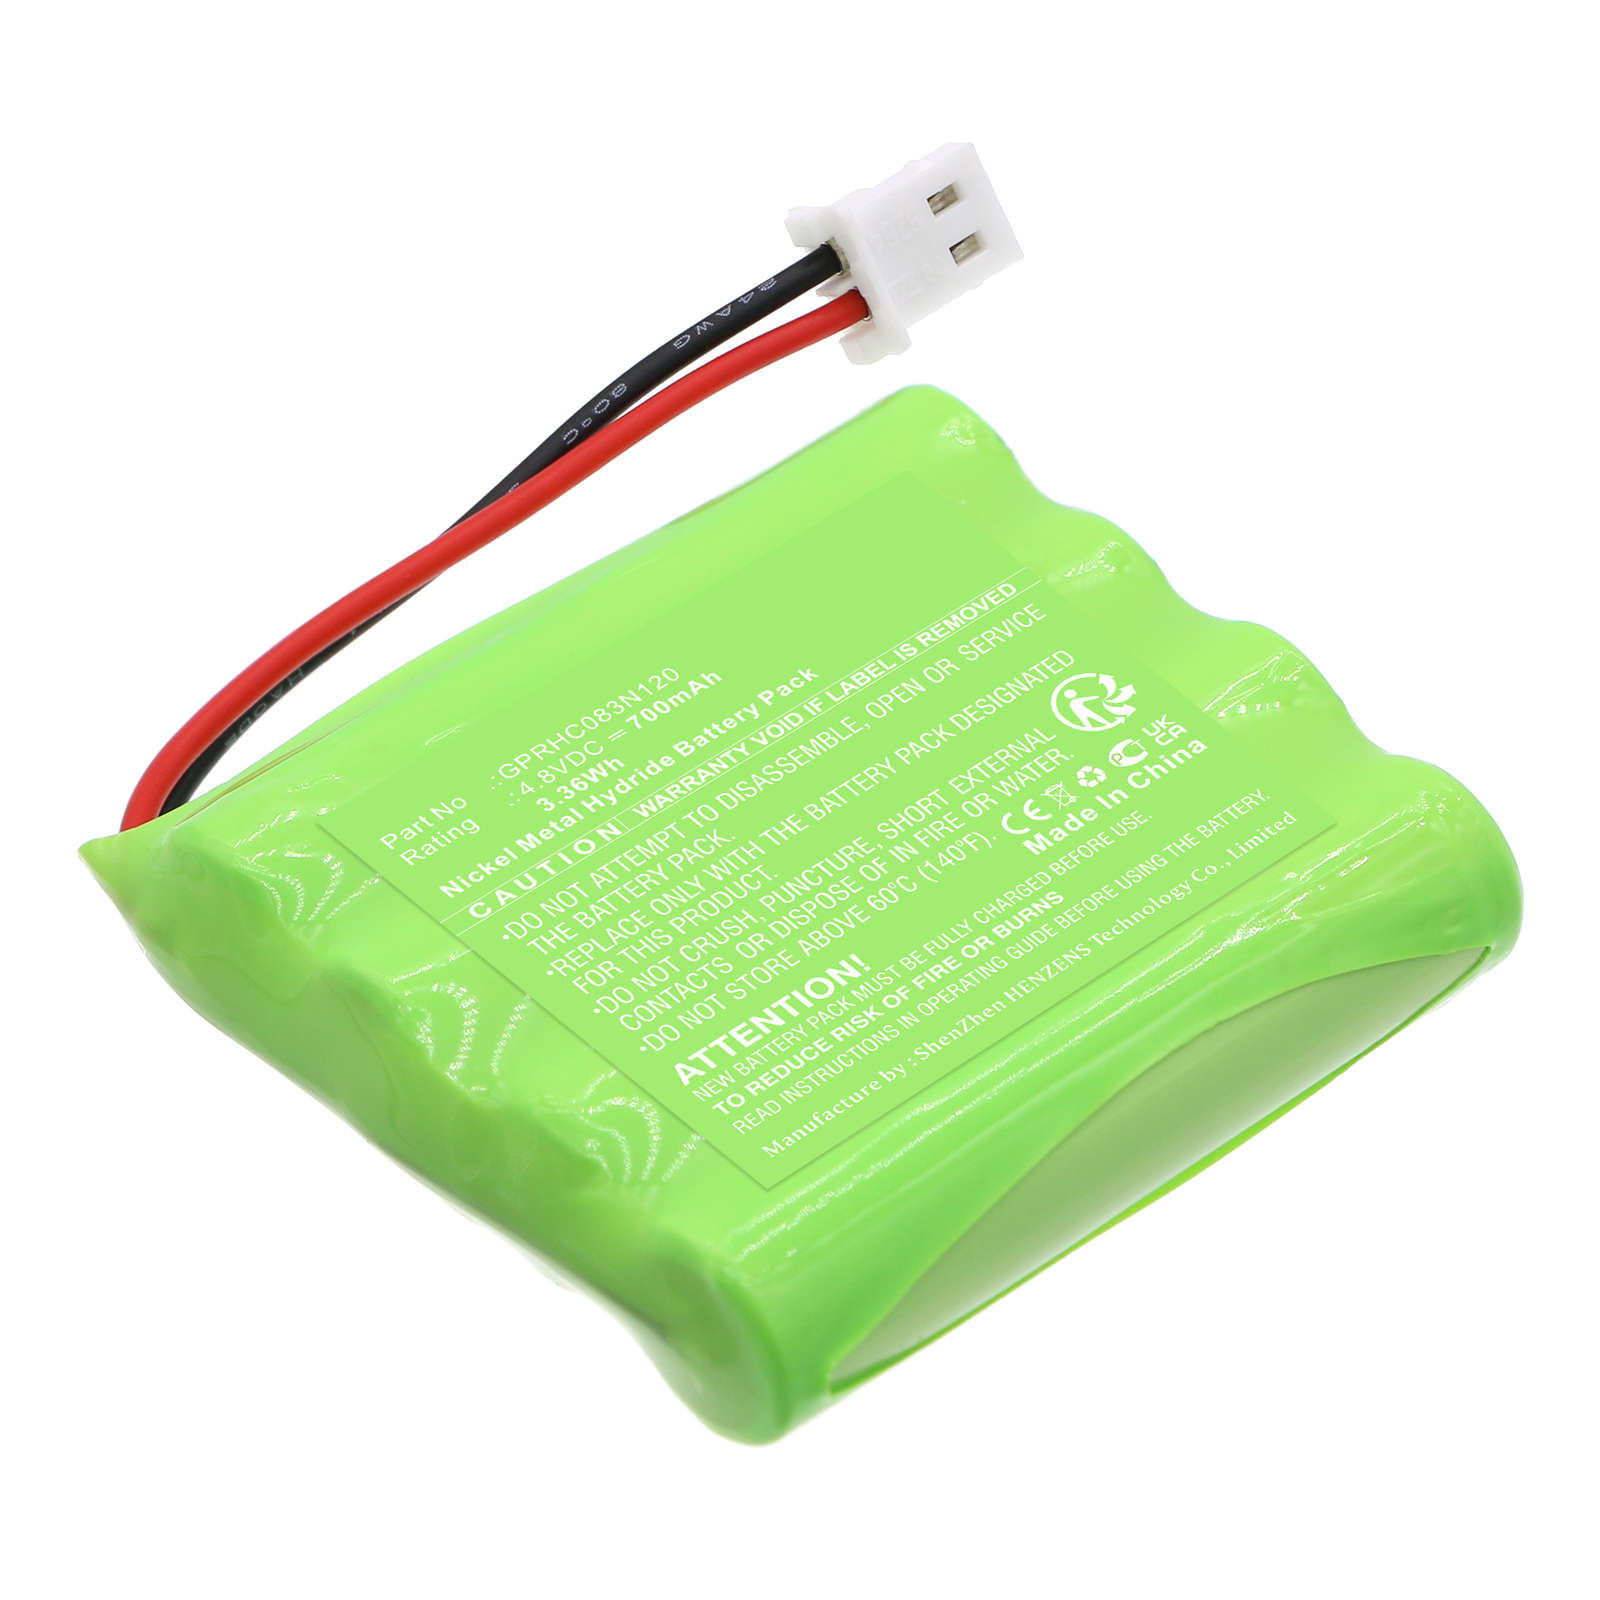 Synergy Digital Medical Battery, Compatible with I-Tech GPRHC083N120 Medical Battery (Ni-MH, 4.8V, 700mAh)